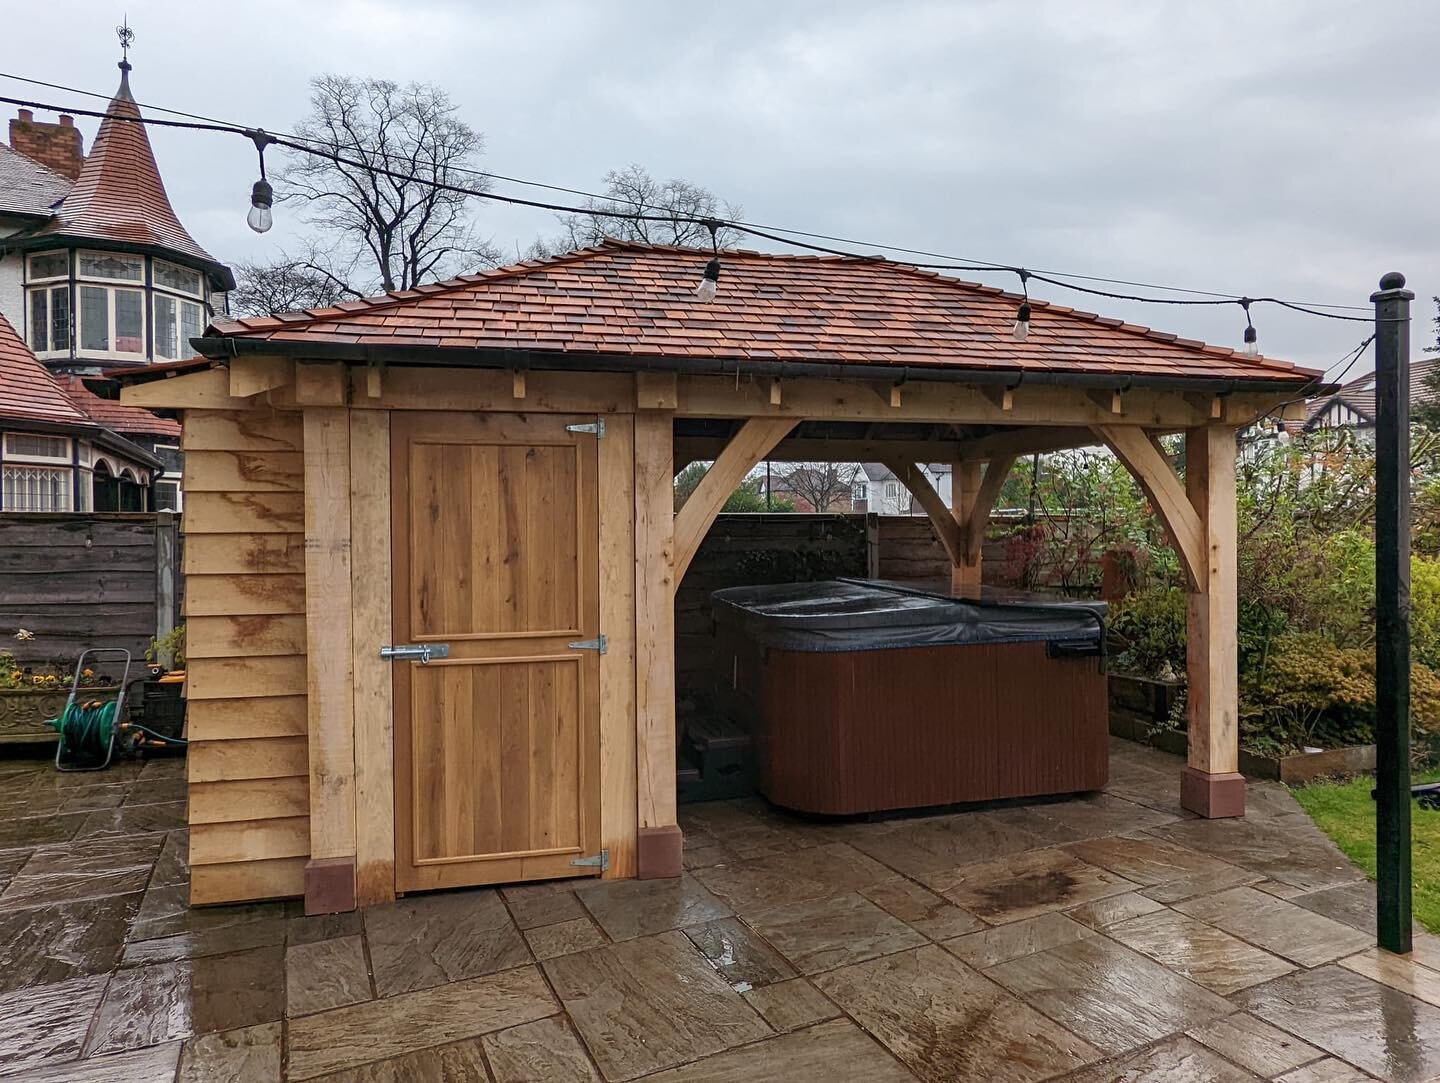 Oak pergola with log store at the back is finished 👌🏼 looks great!